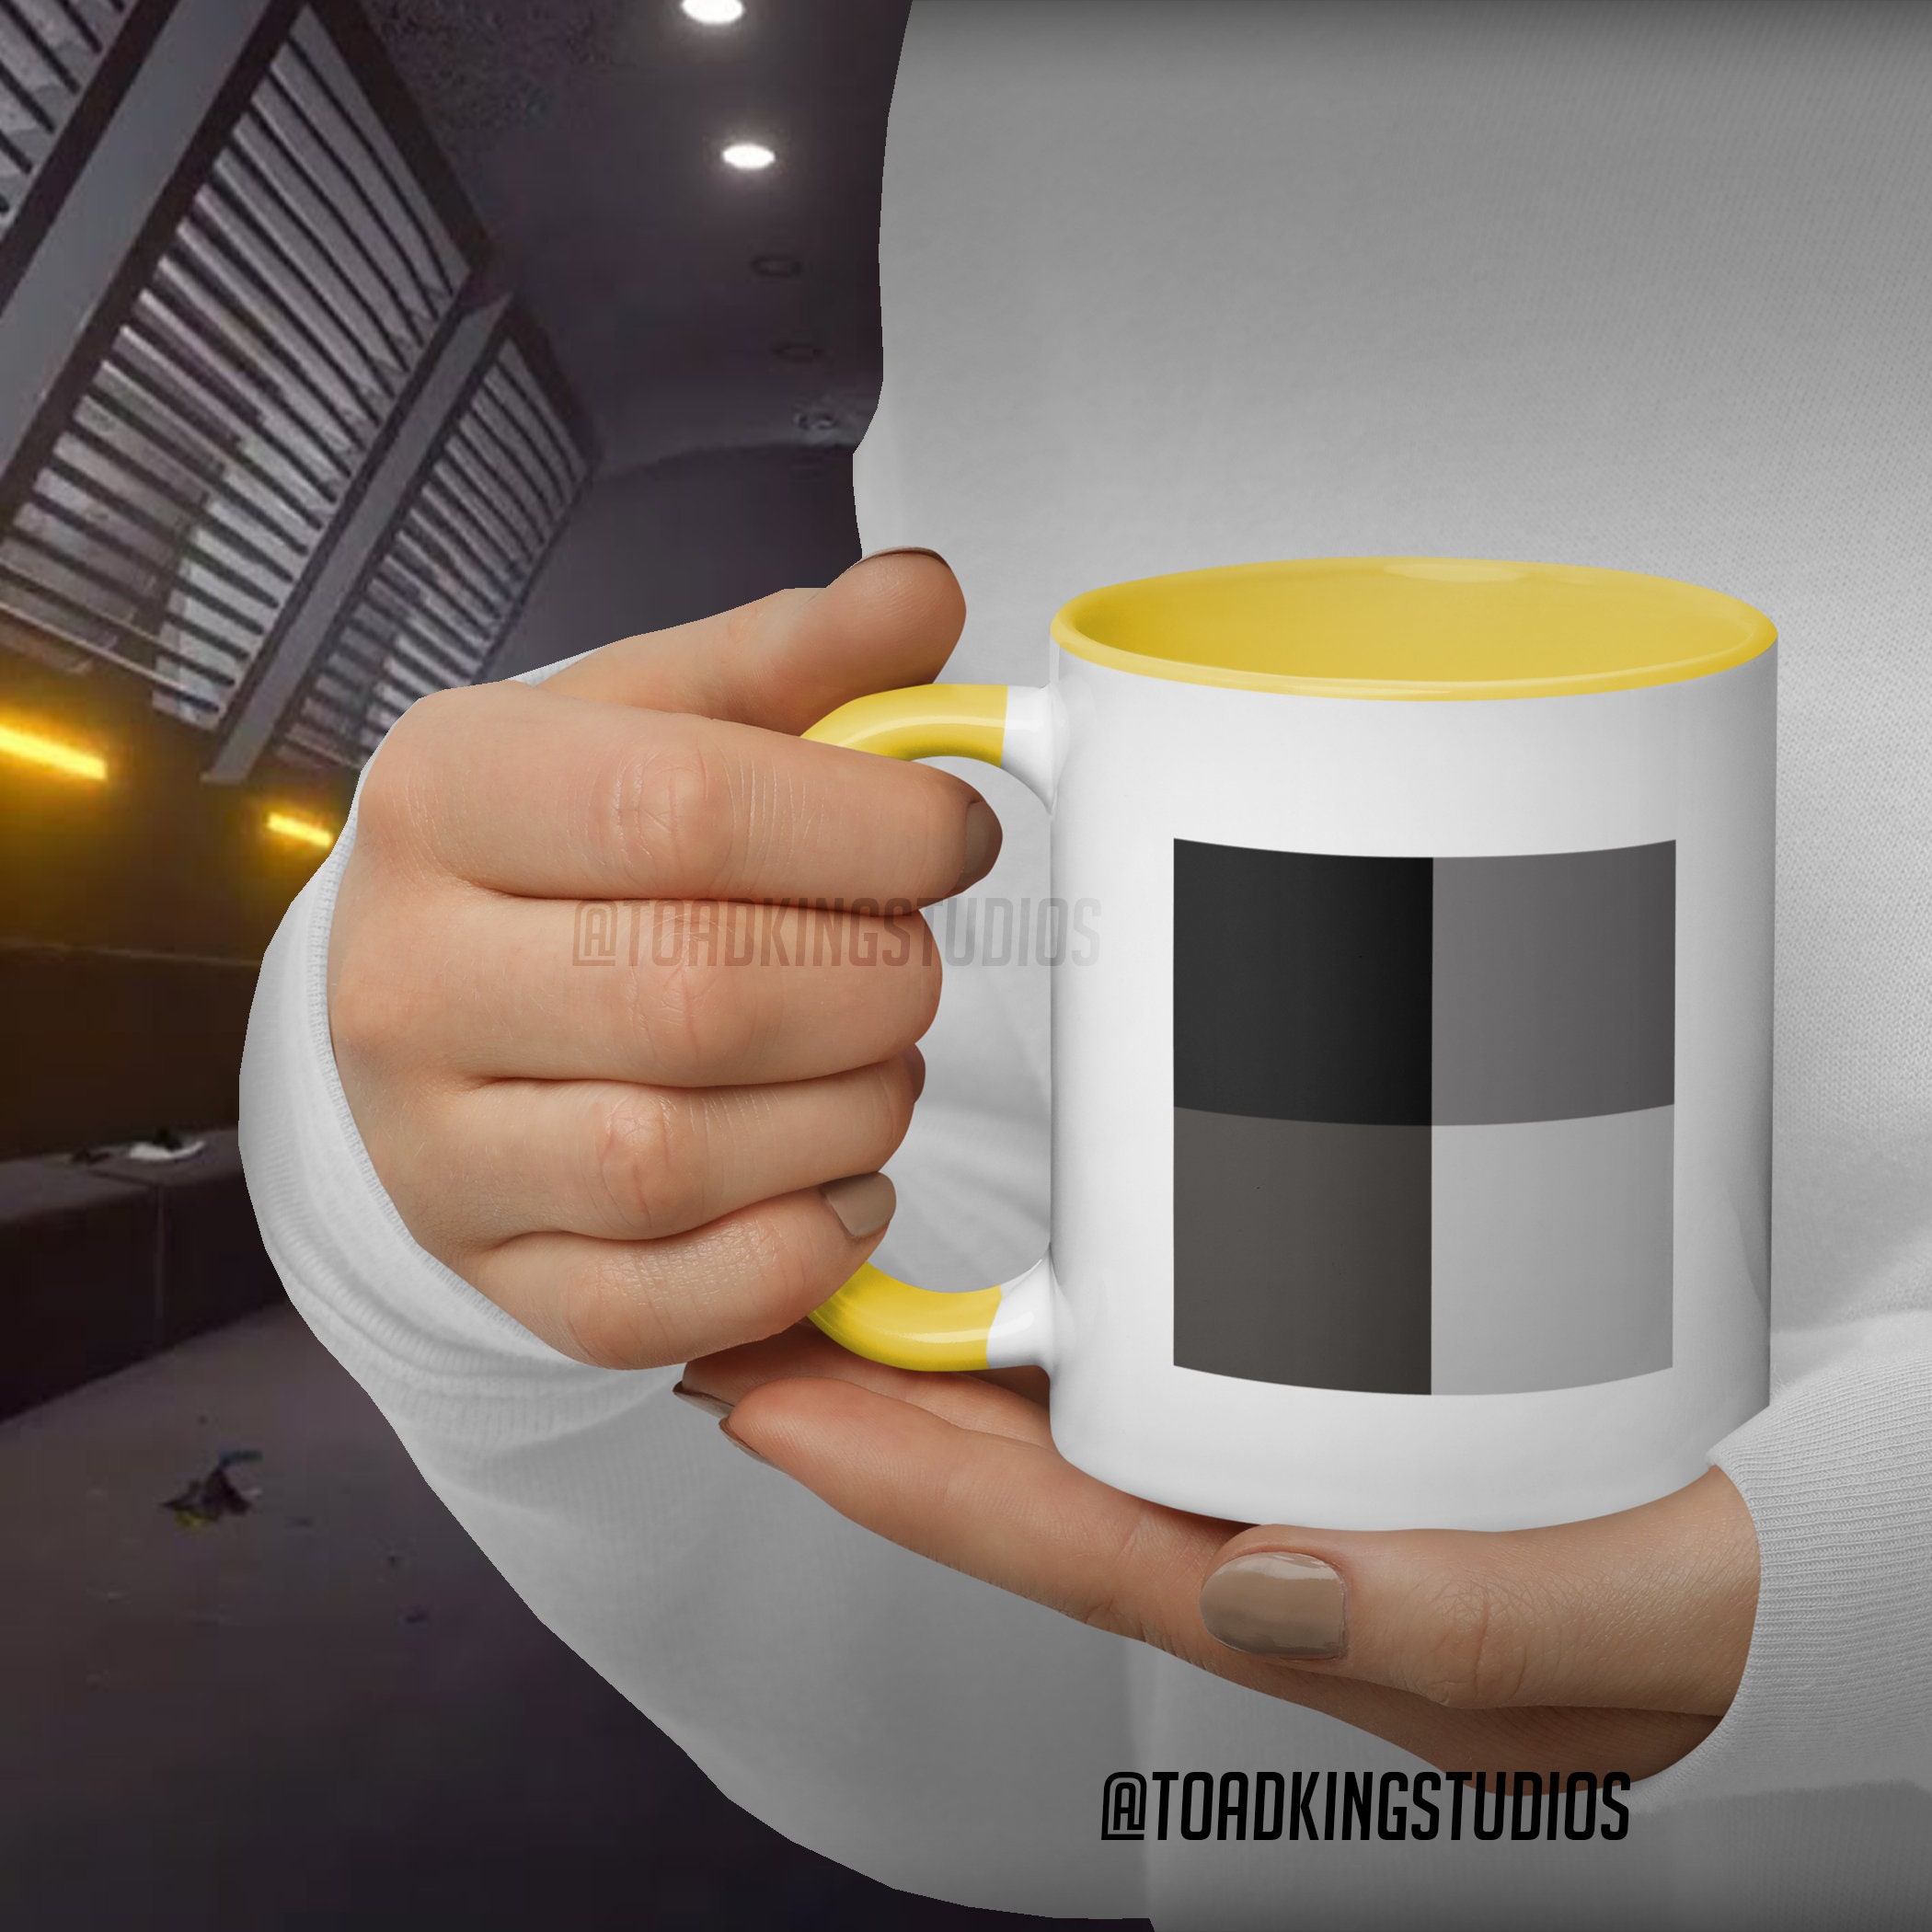 SCP-096 four Fucking Pixels Mug With Color Inside POD -  Finland